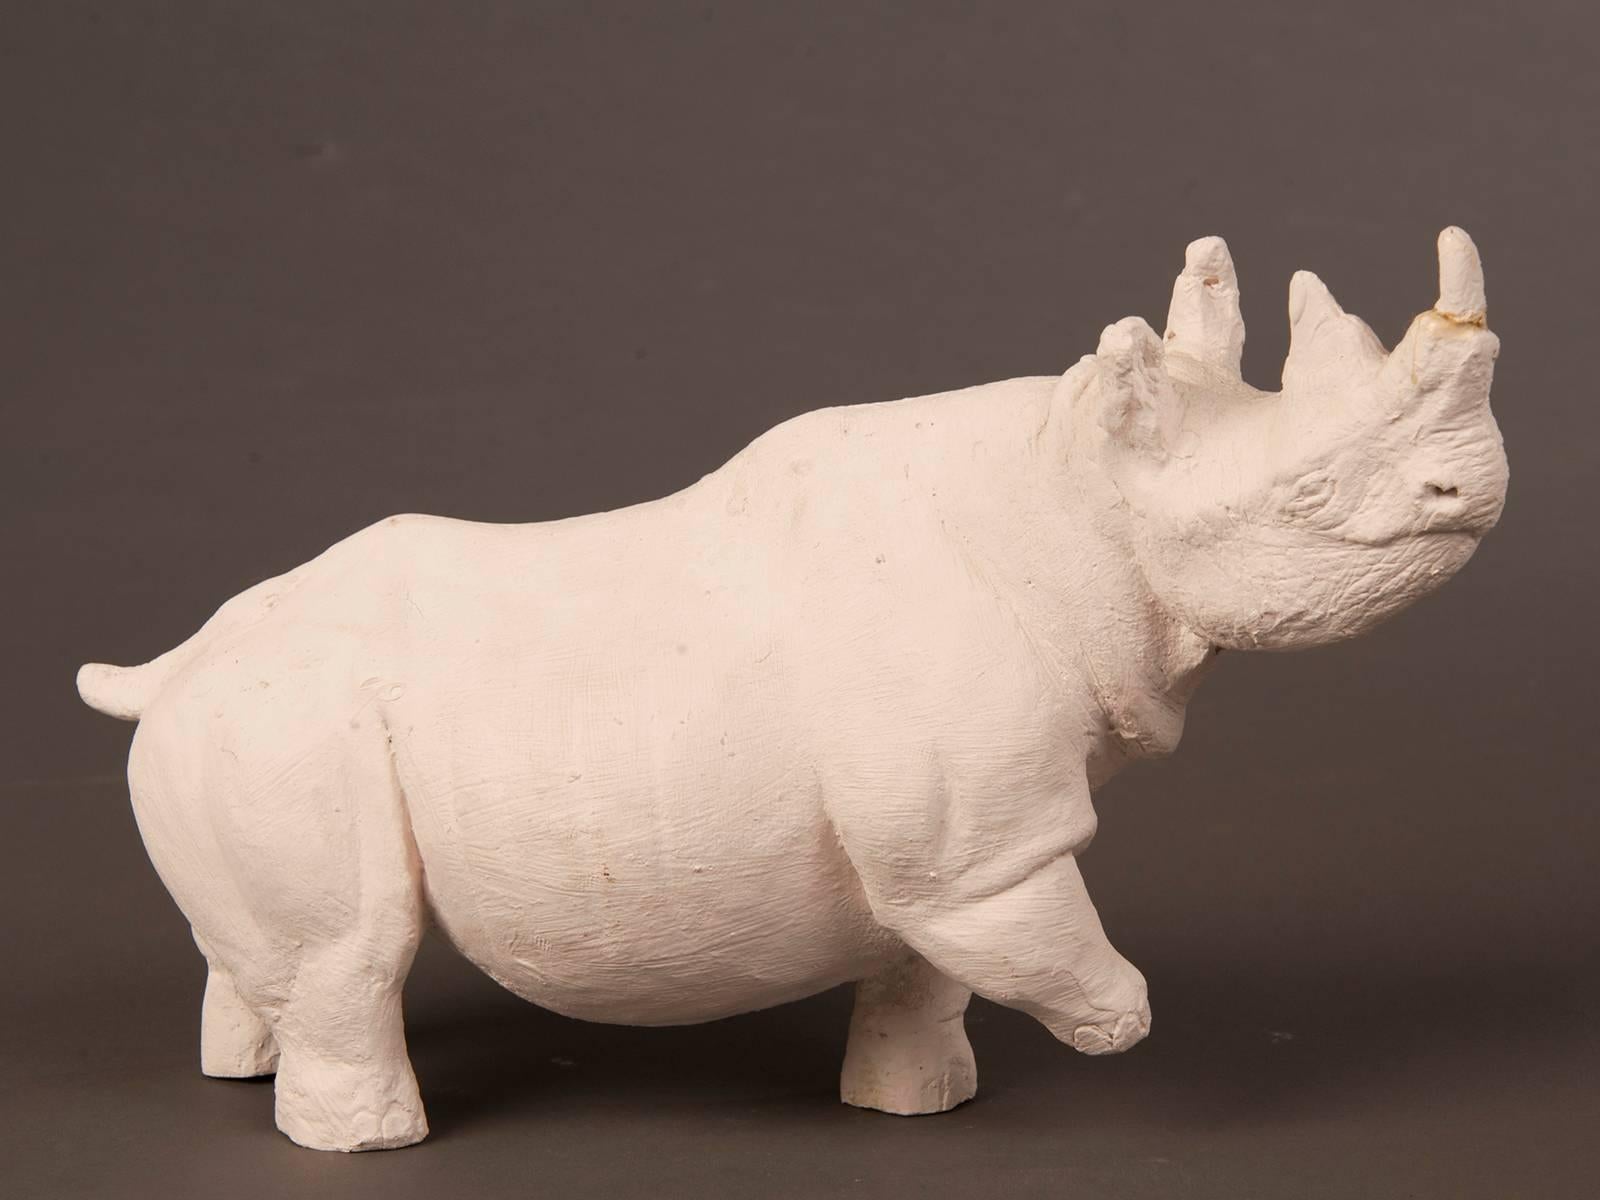 Be the first to see our new arrivals directly through 1stdibs! Please click follow dealer below. 

A Vintage standing rhinoceros plaster maquette figure from a private collection in France, circa 1960.
       